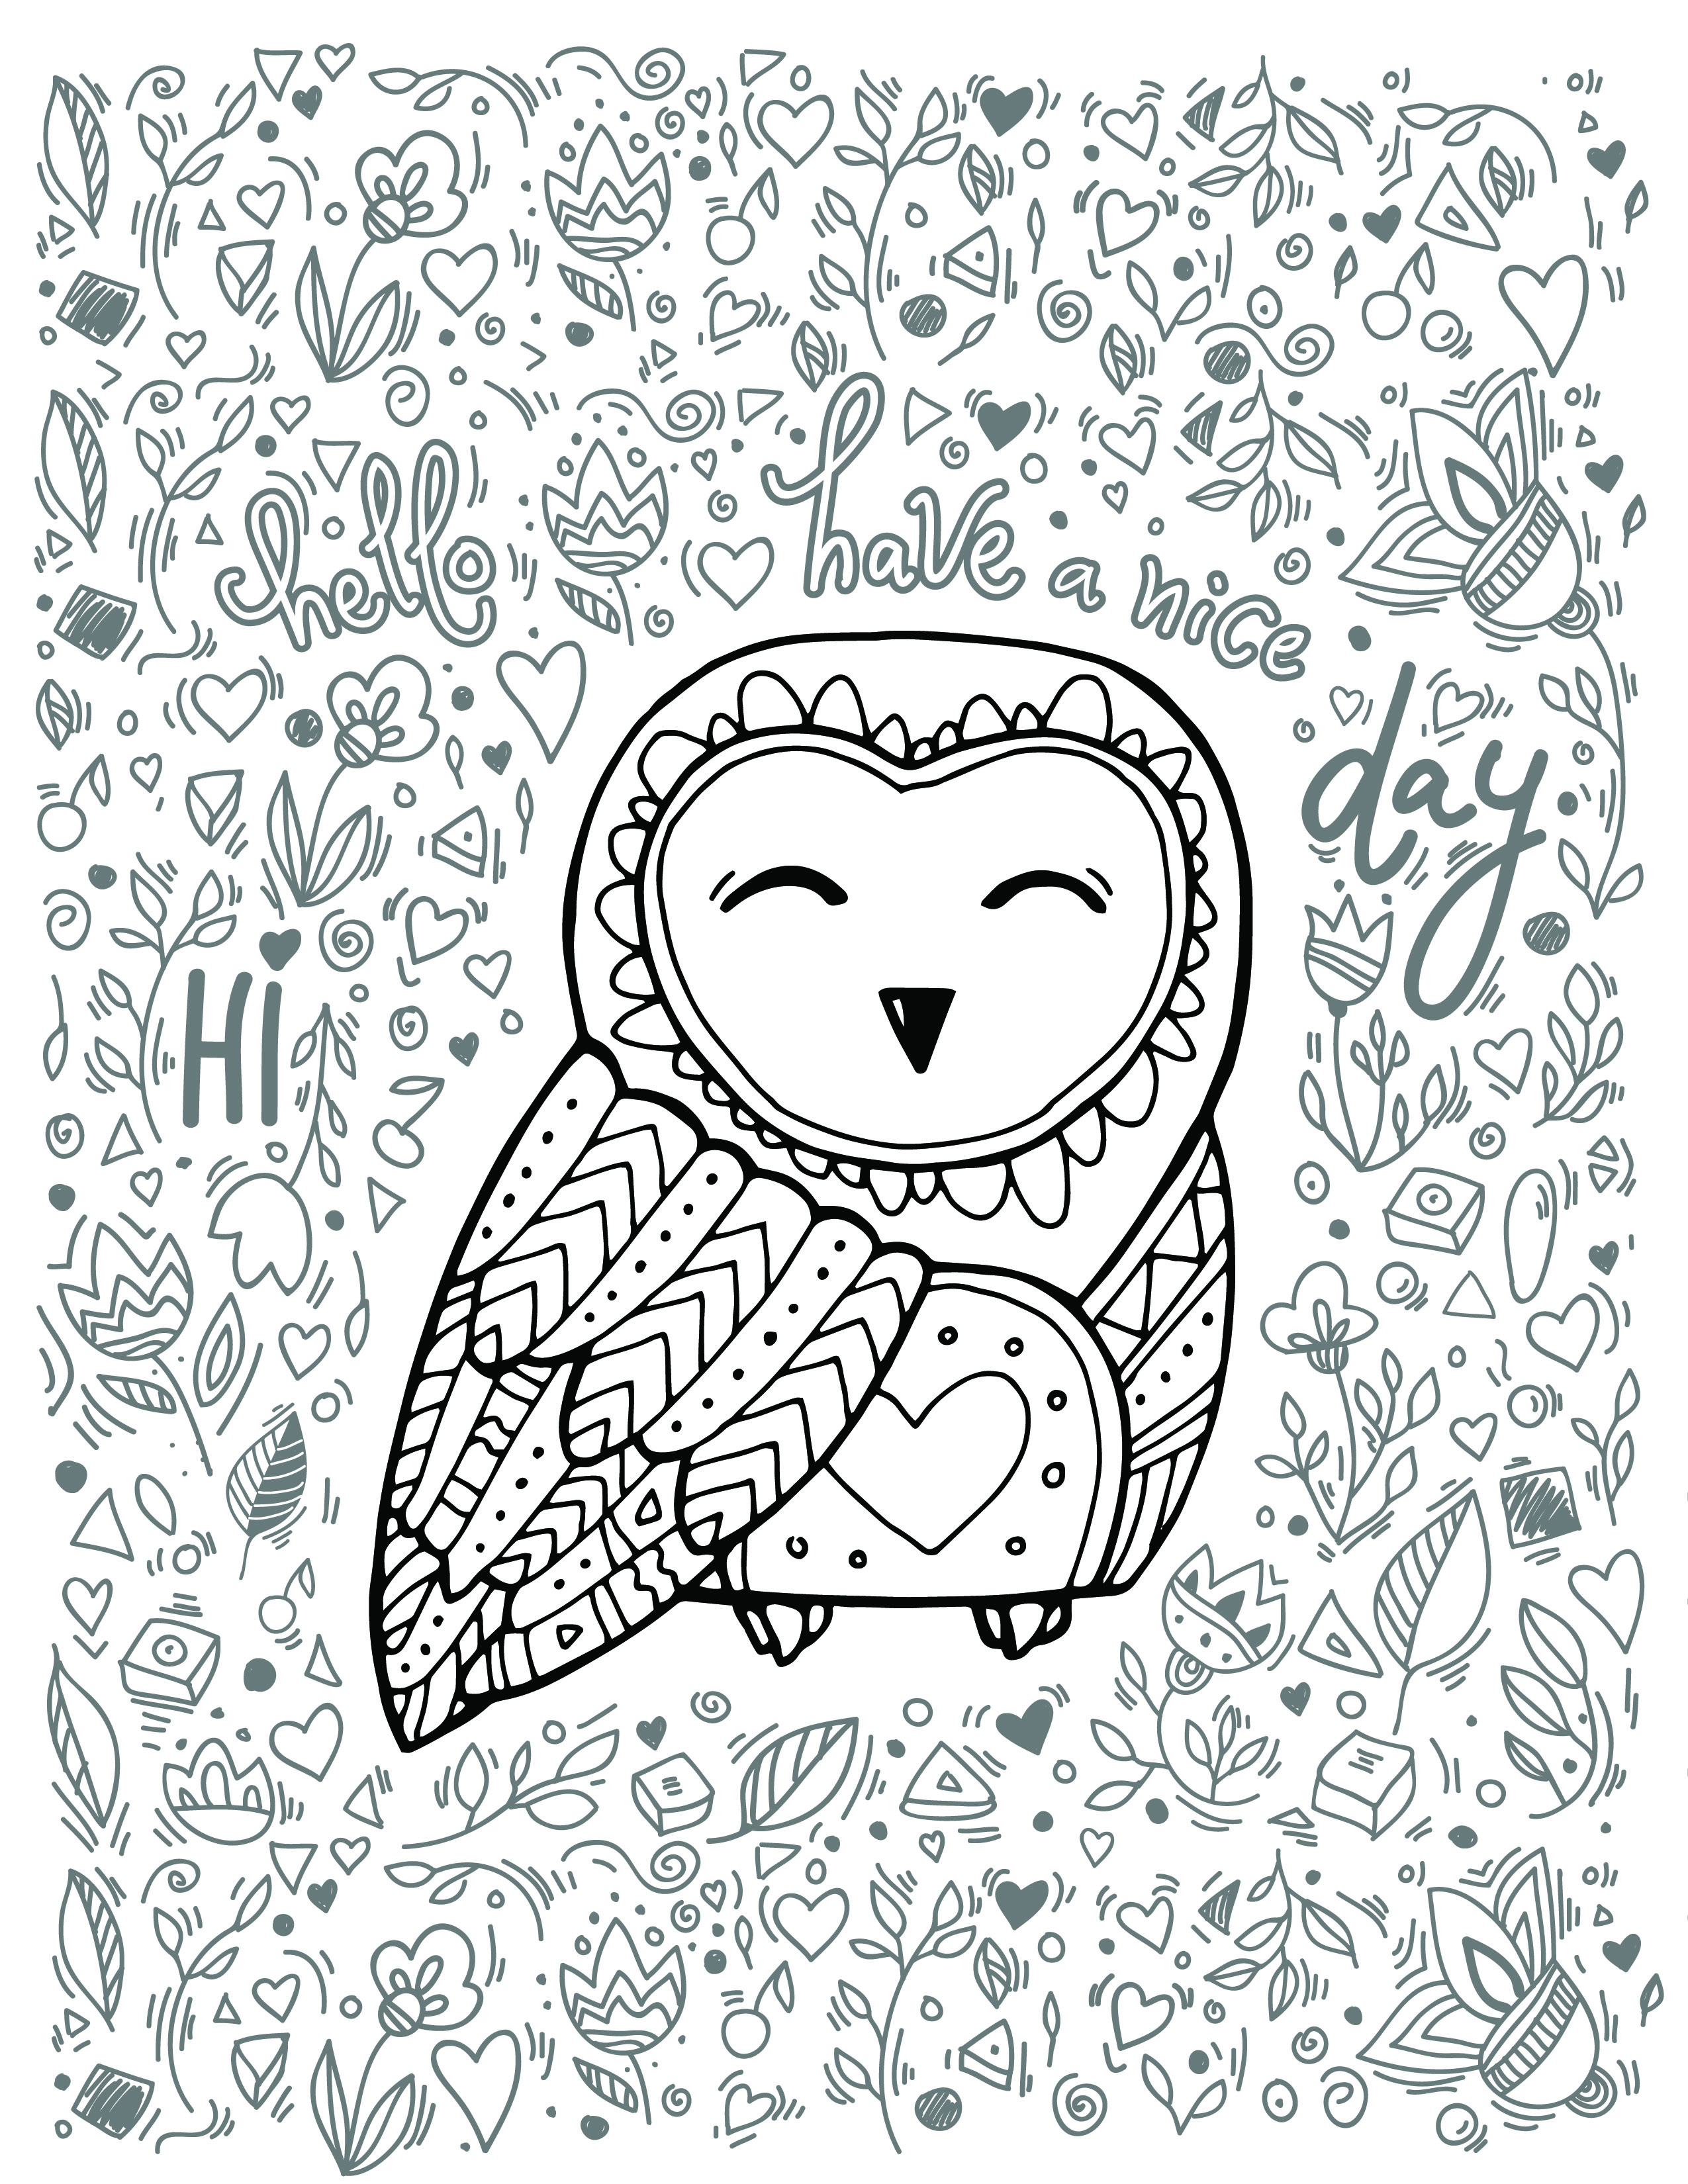 cute owl coloring pages for girls